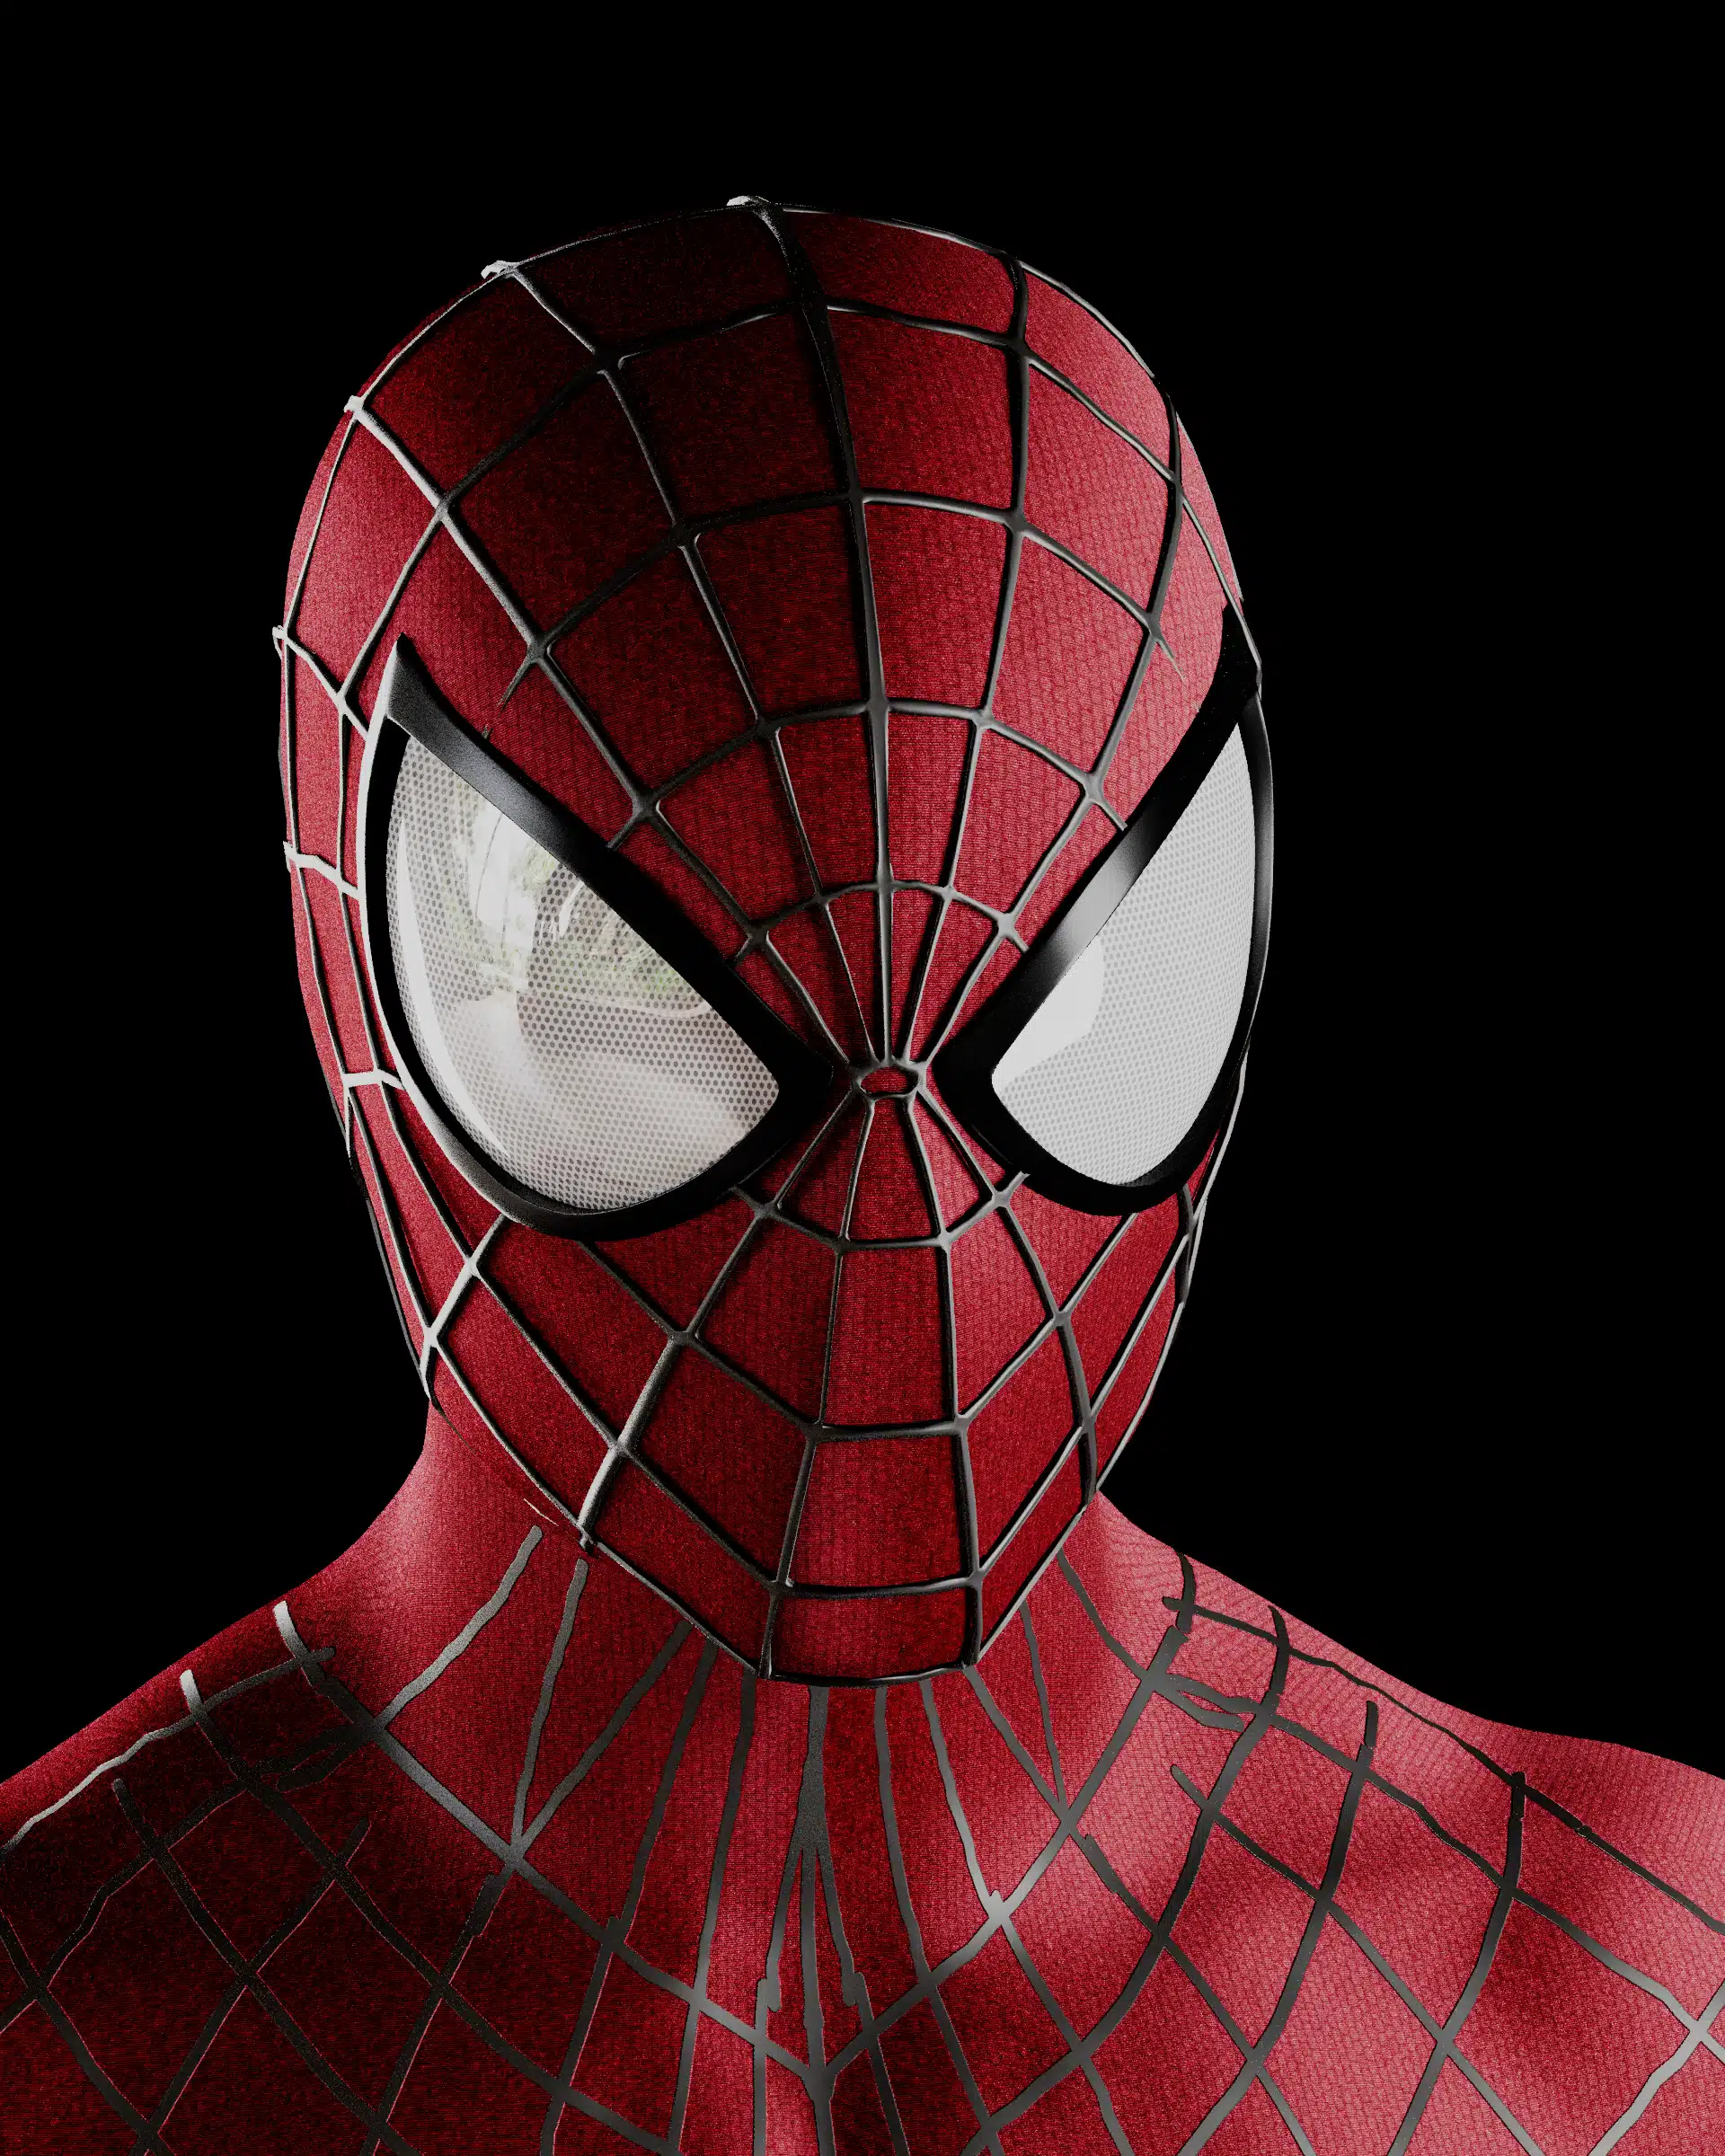 When is Marvel's Spiderman 2 coming to PC?